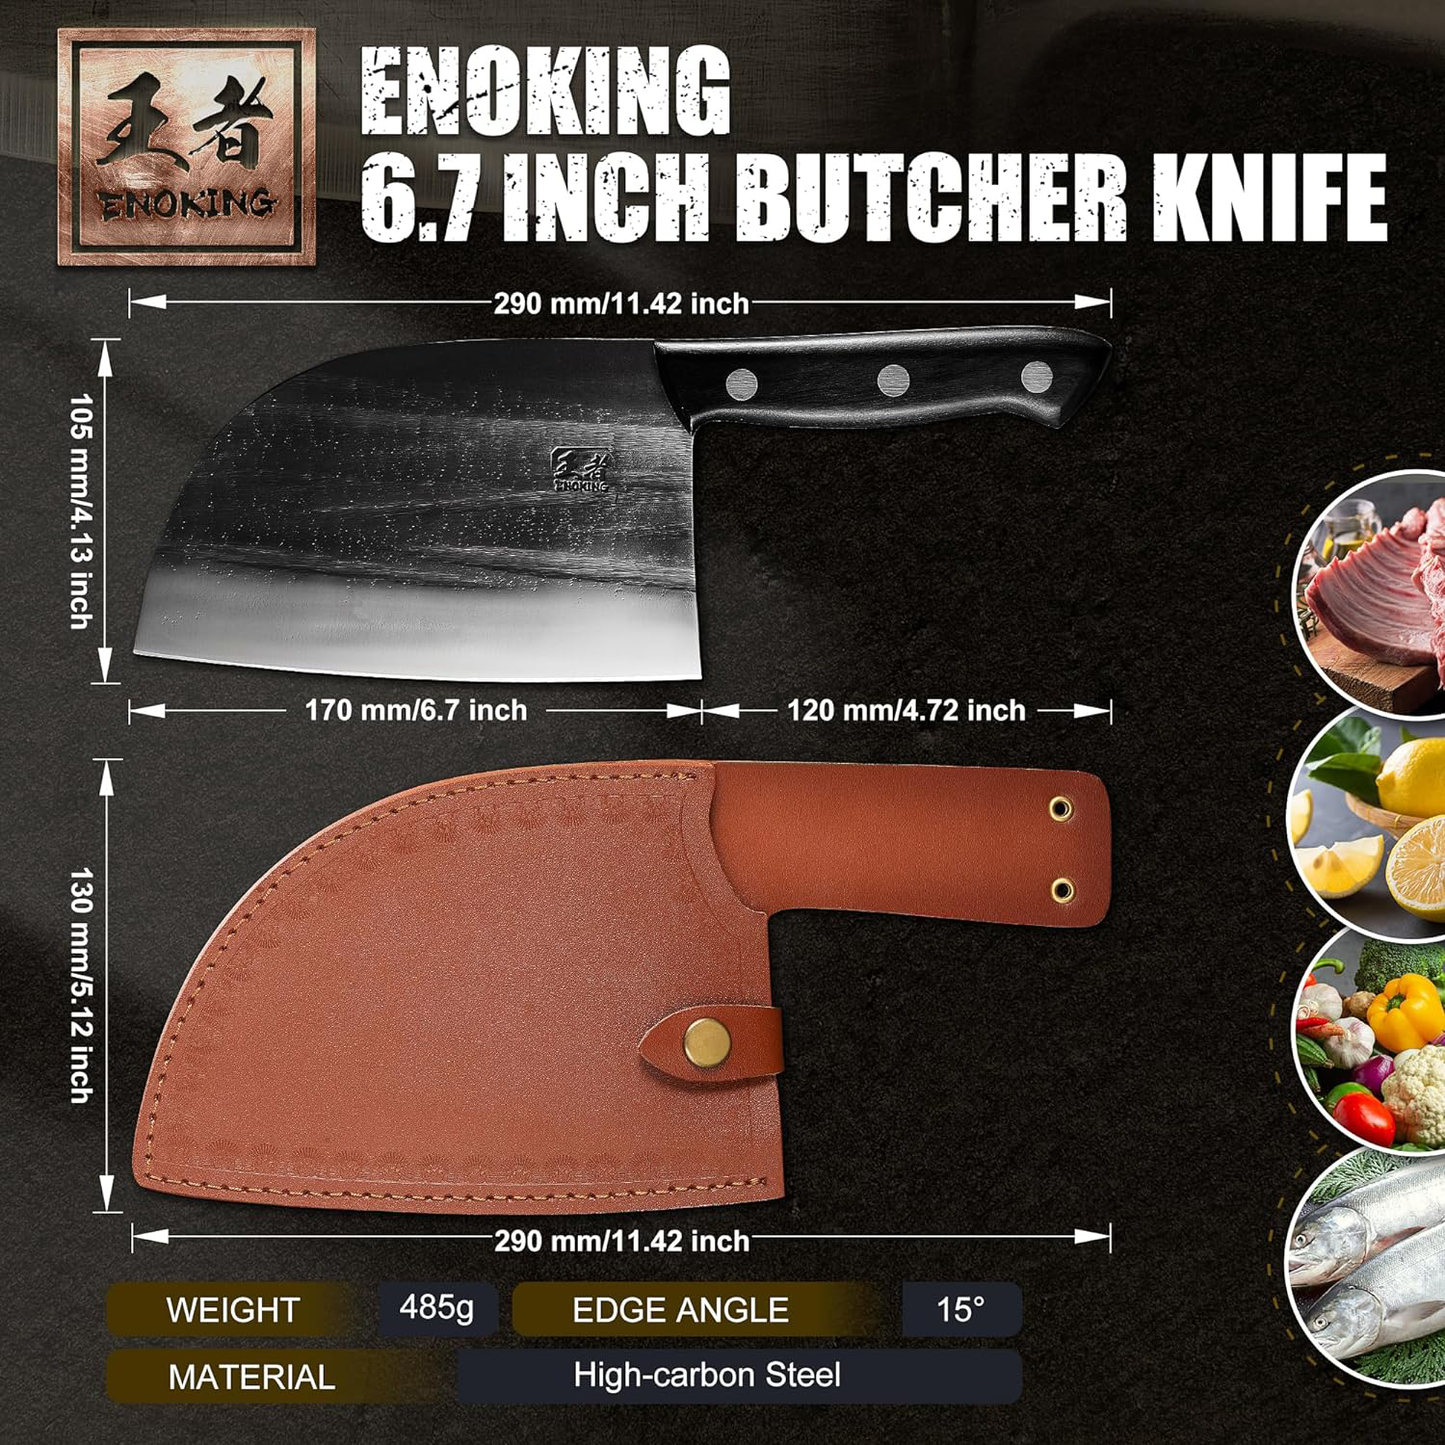 KD Serbian Cleaver Knife with Leather Sheath: 6.7 Inch Butcher Knife